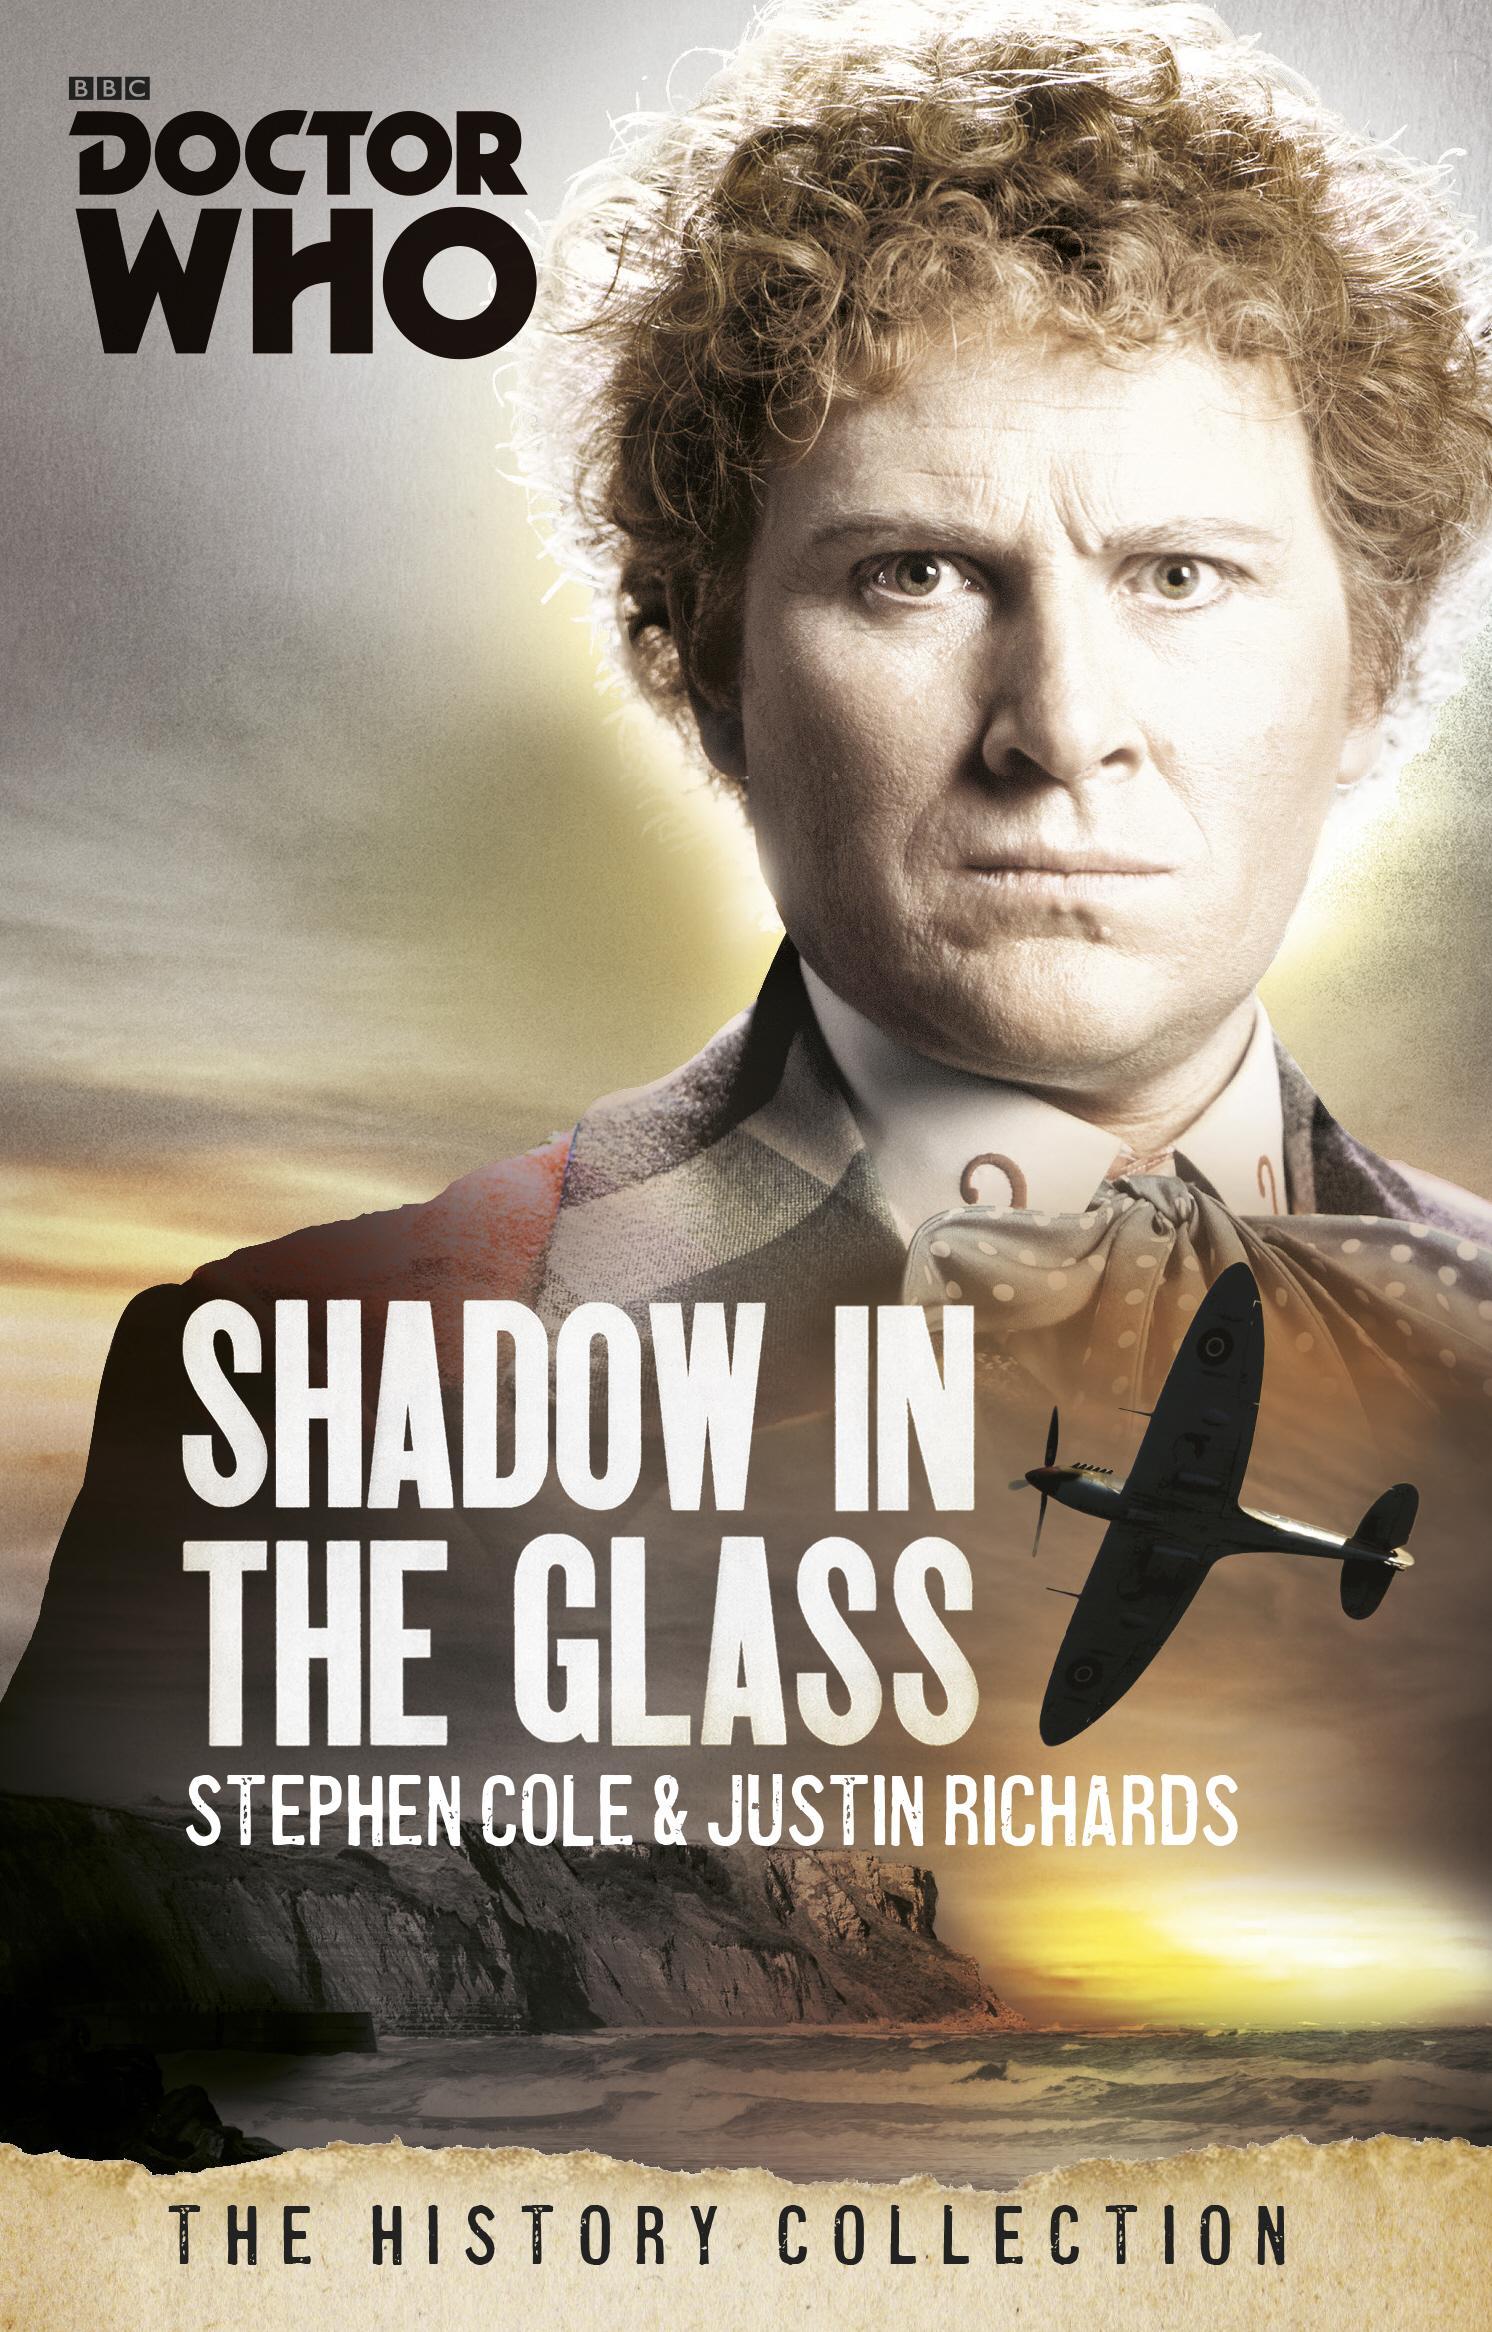 Doctor Who: The Shadow In The Glass - Justin Richards